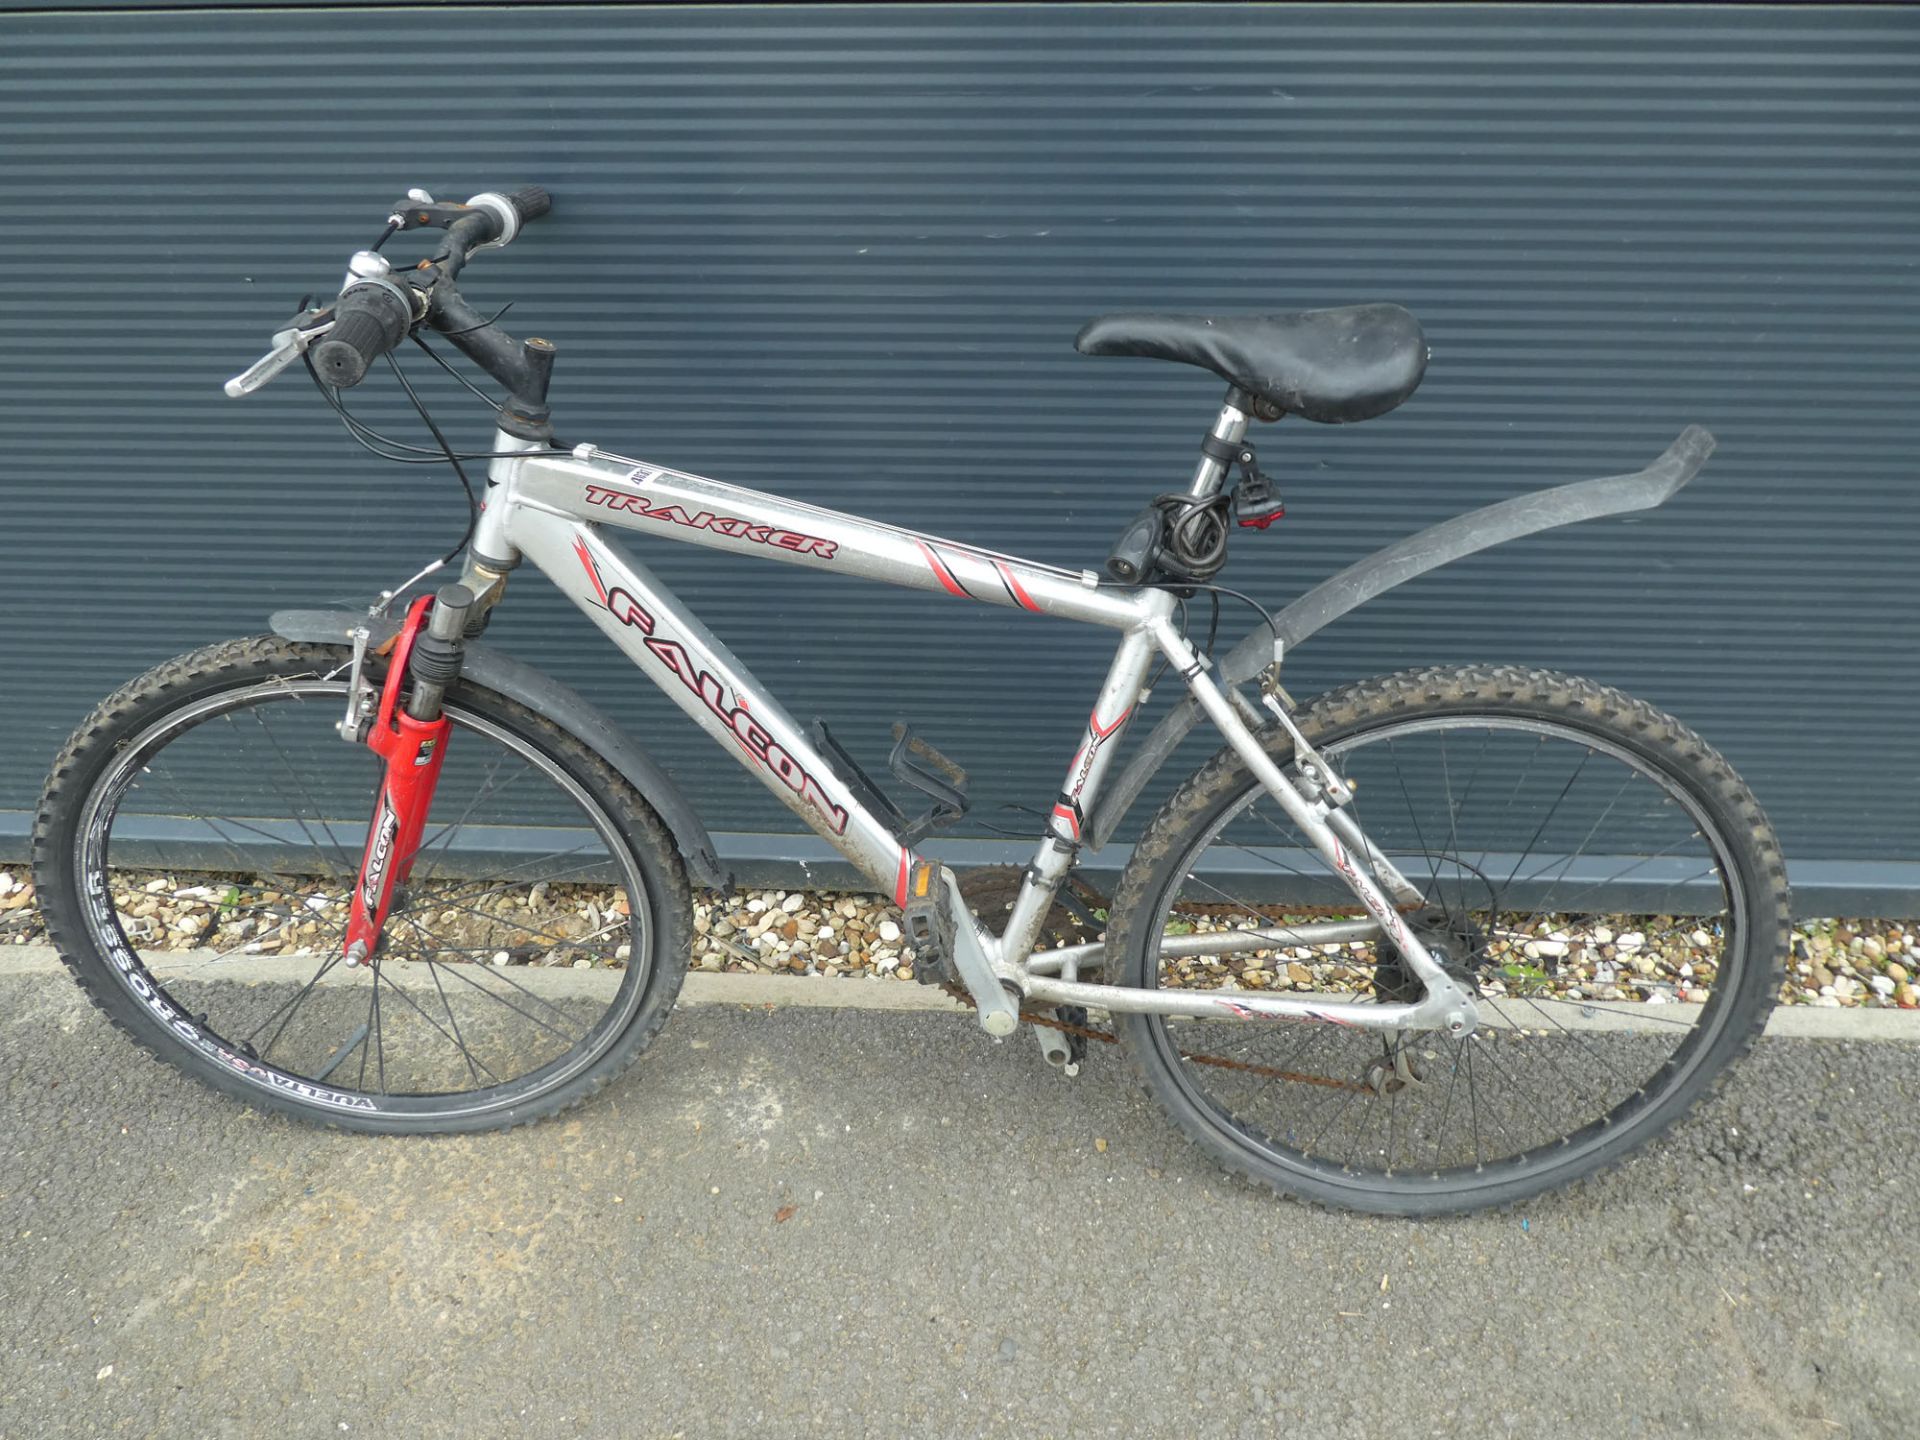 4039 - Silver and red Falcon gents mountain bike